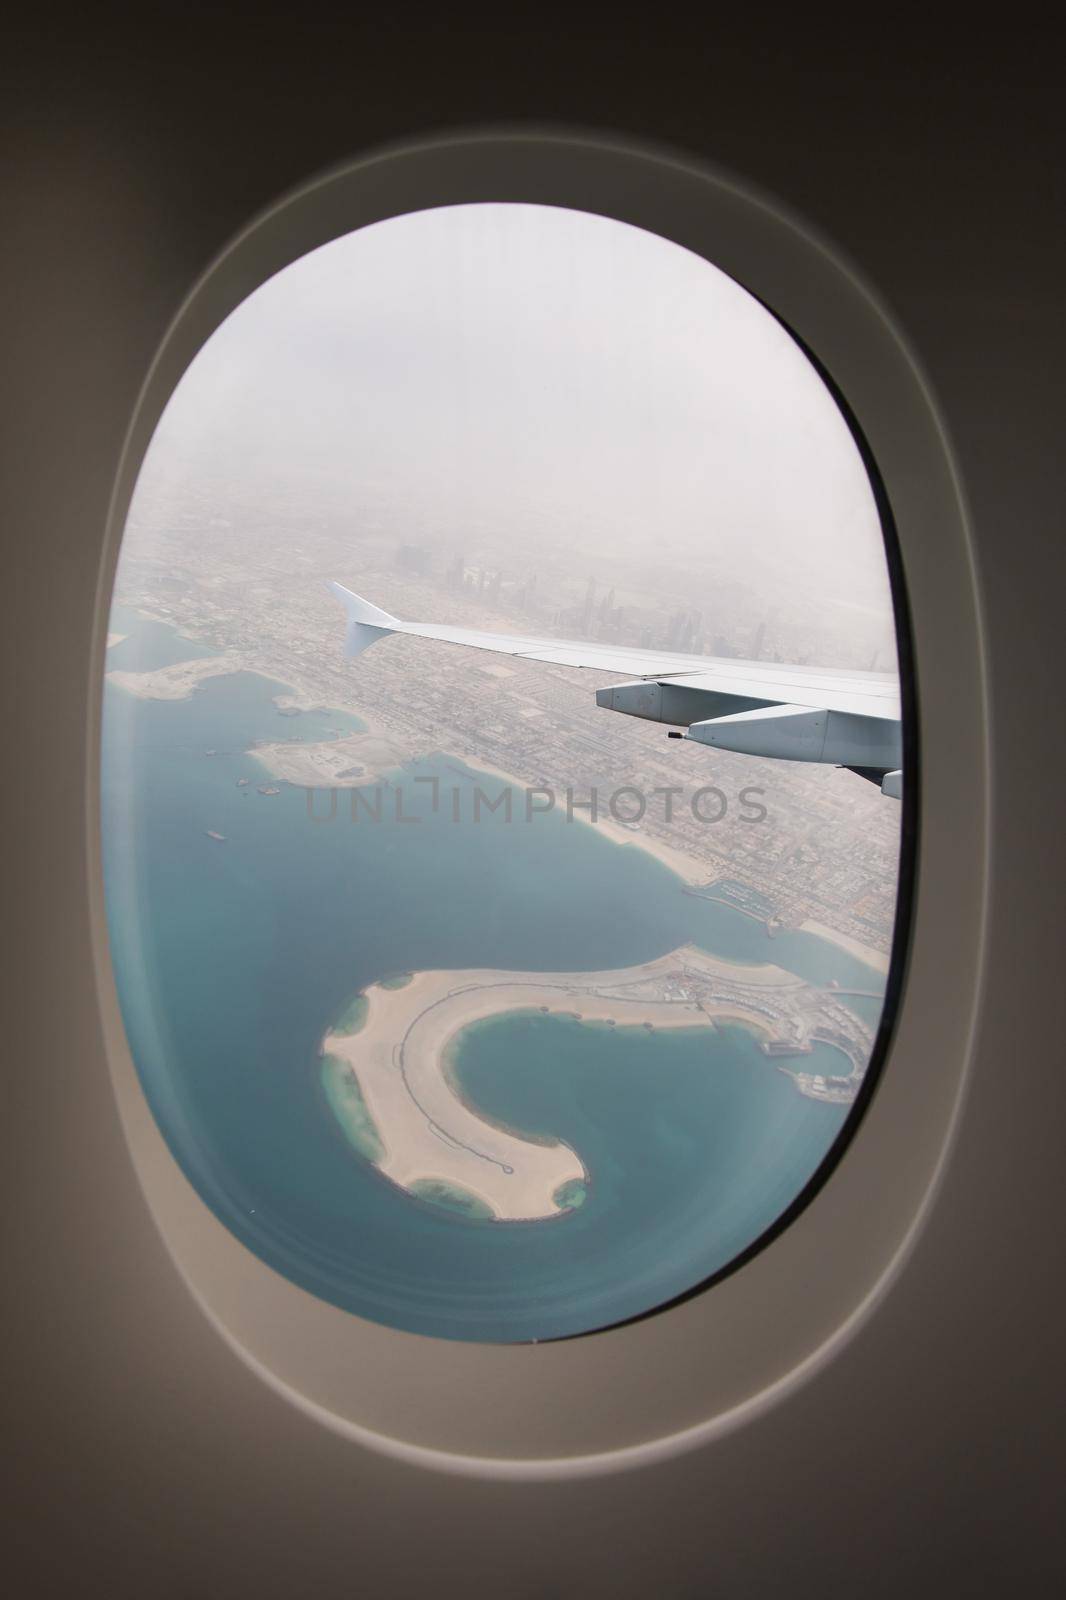 The plane-the view from the window of the porthole on the city Arab Emirates Dubai. by StudioPeace